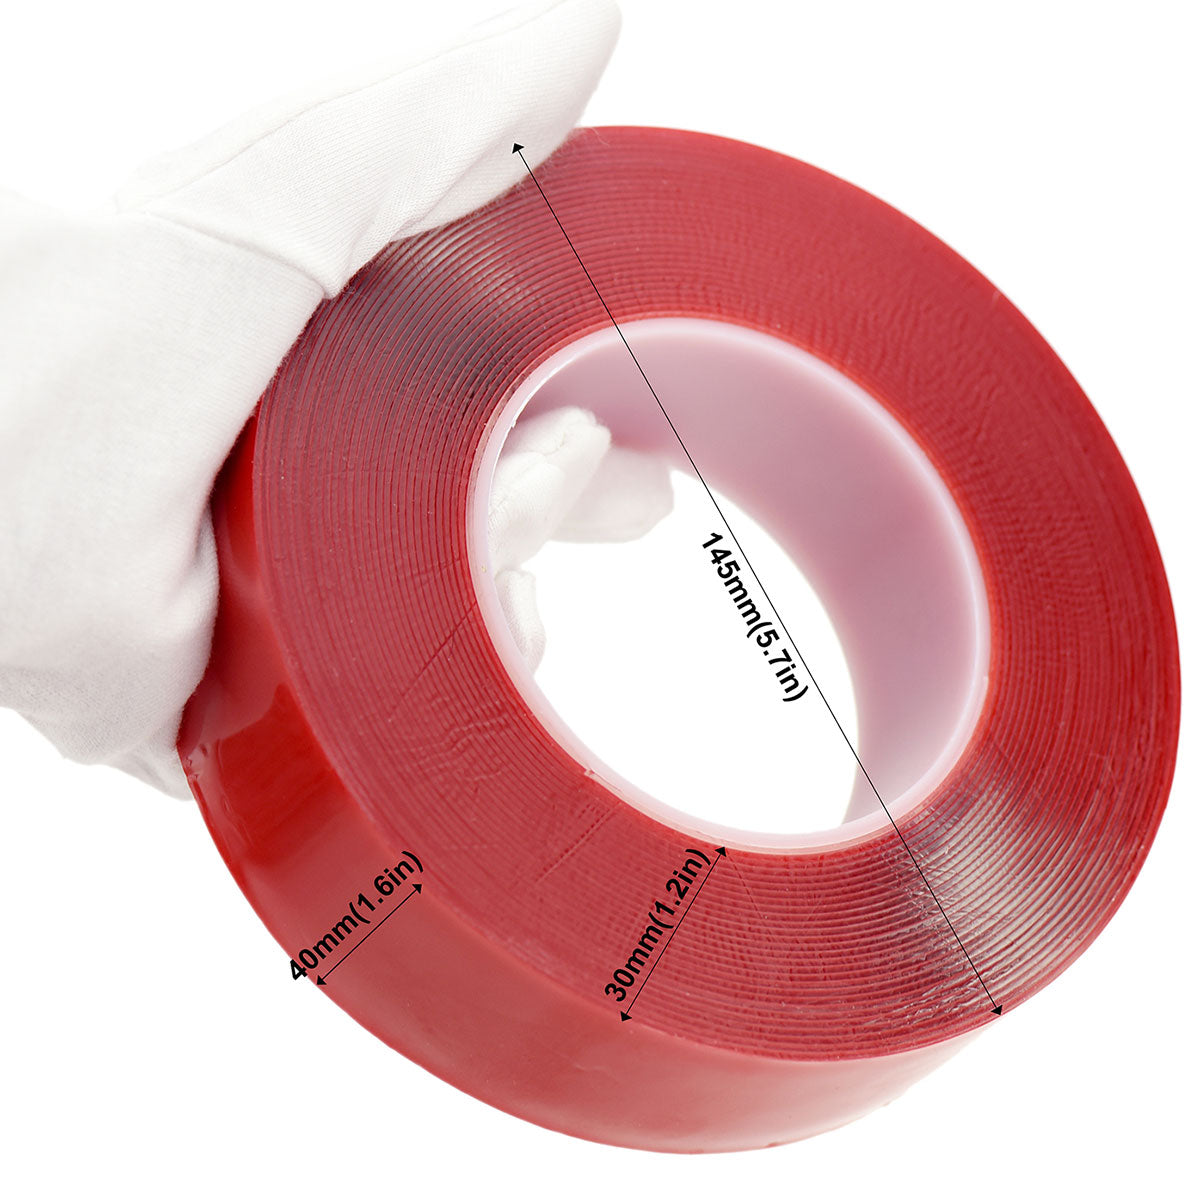 40mm x 1mm x 10 meters Multi-Purpose High Strength Transparent Acrylic Gel Adhesive Double Sided Tape Roll No Residue